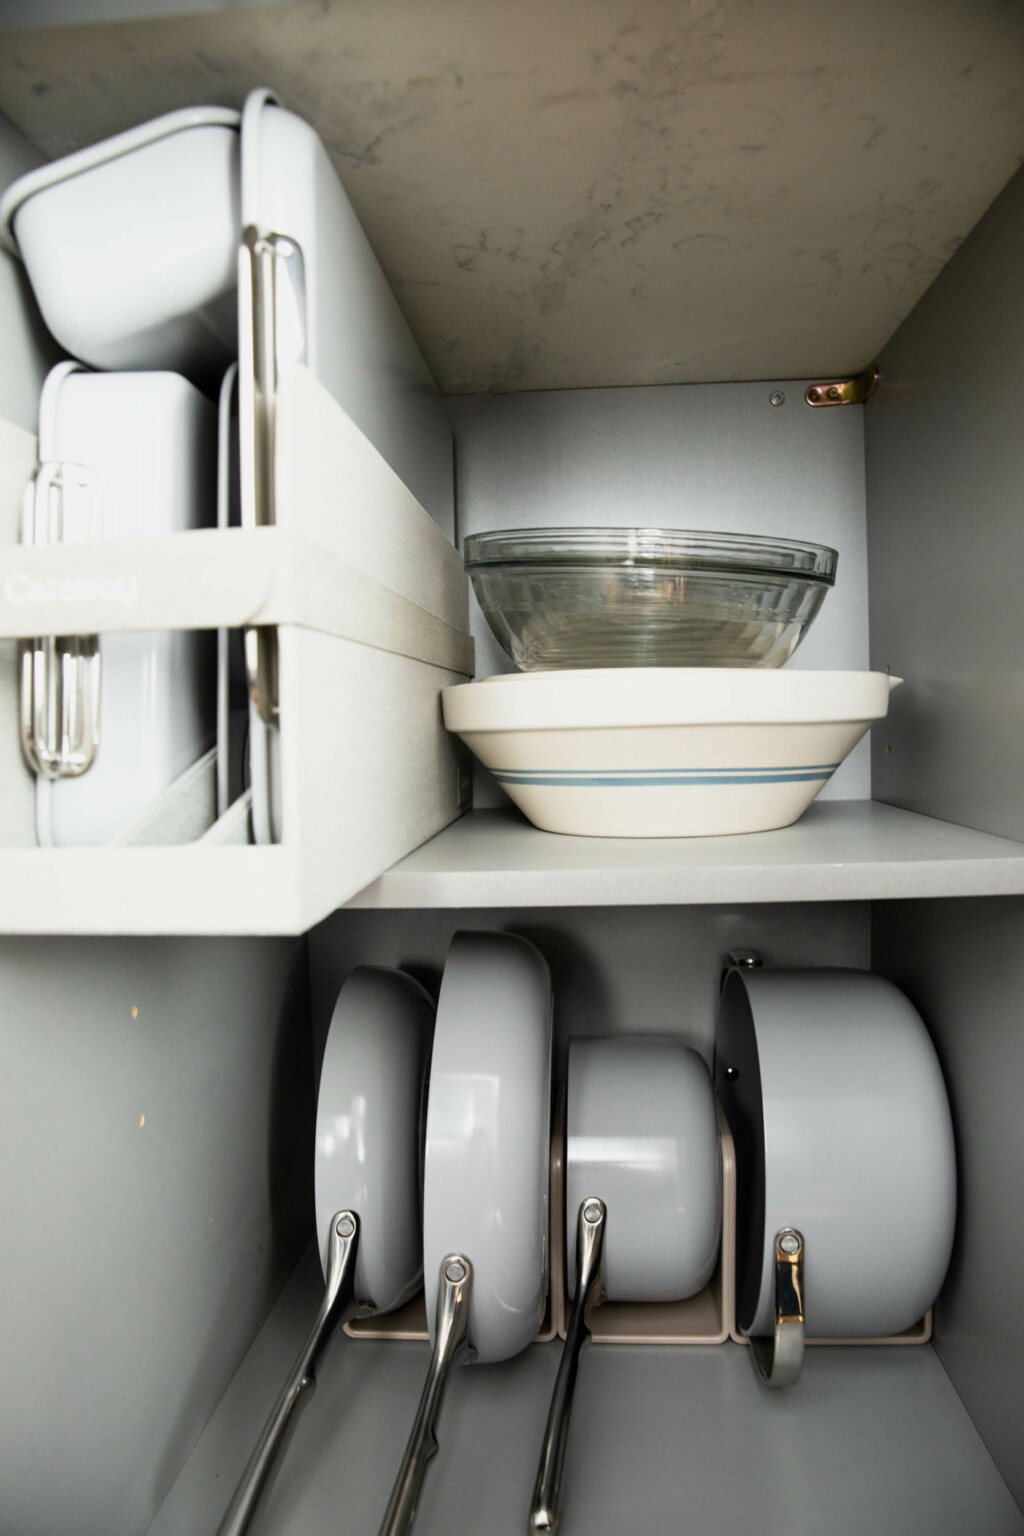 We Tried The Caraway Cookware Storage Caddies, Here's Our Full